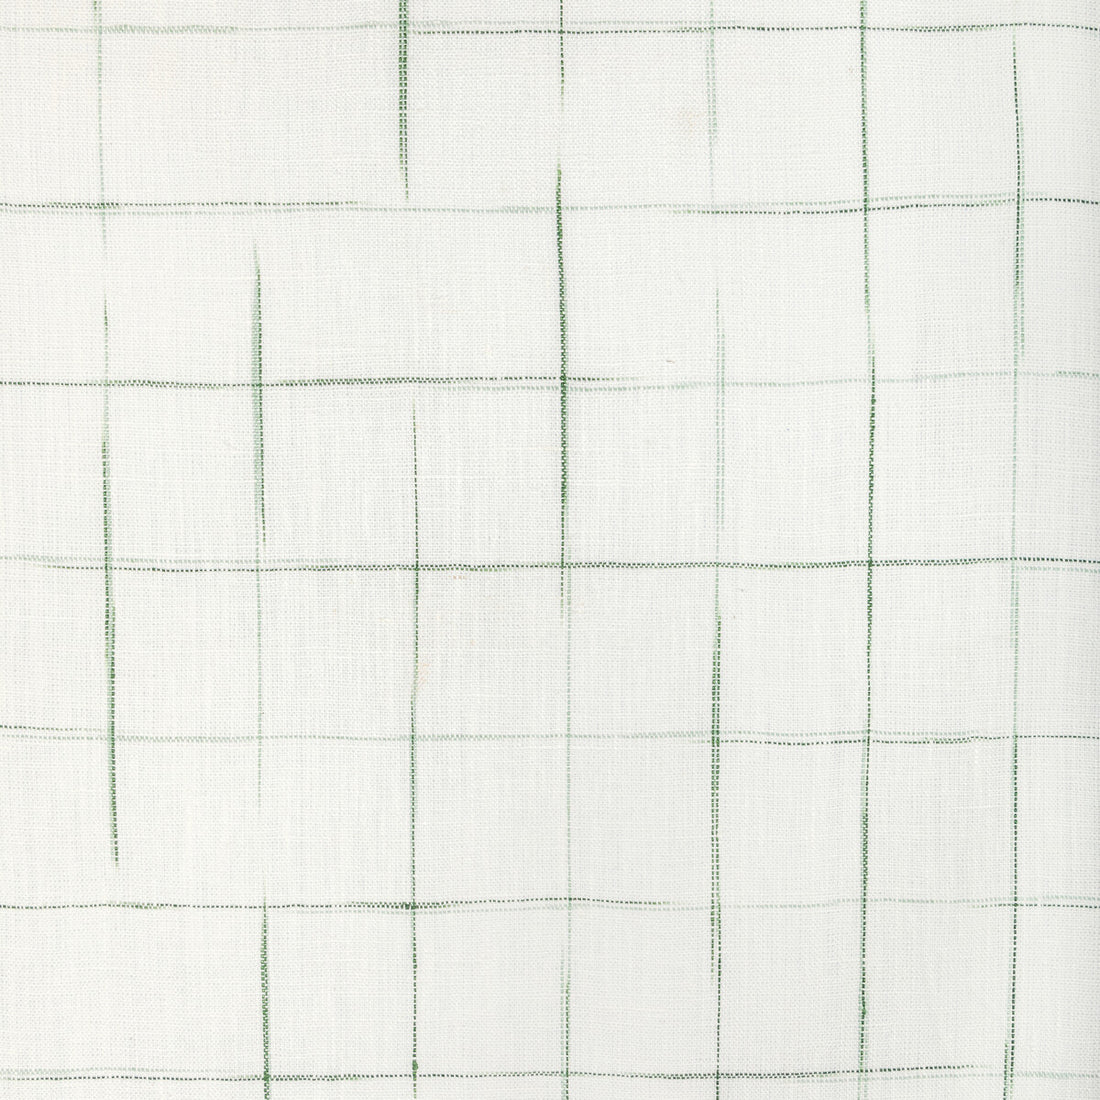 Ennis Check fabric in grass color - pattern 36375.31.0 - by Kravet Design in the Jeffrey Alan Marks Seascapes collection